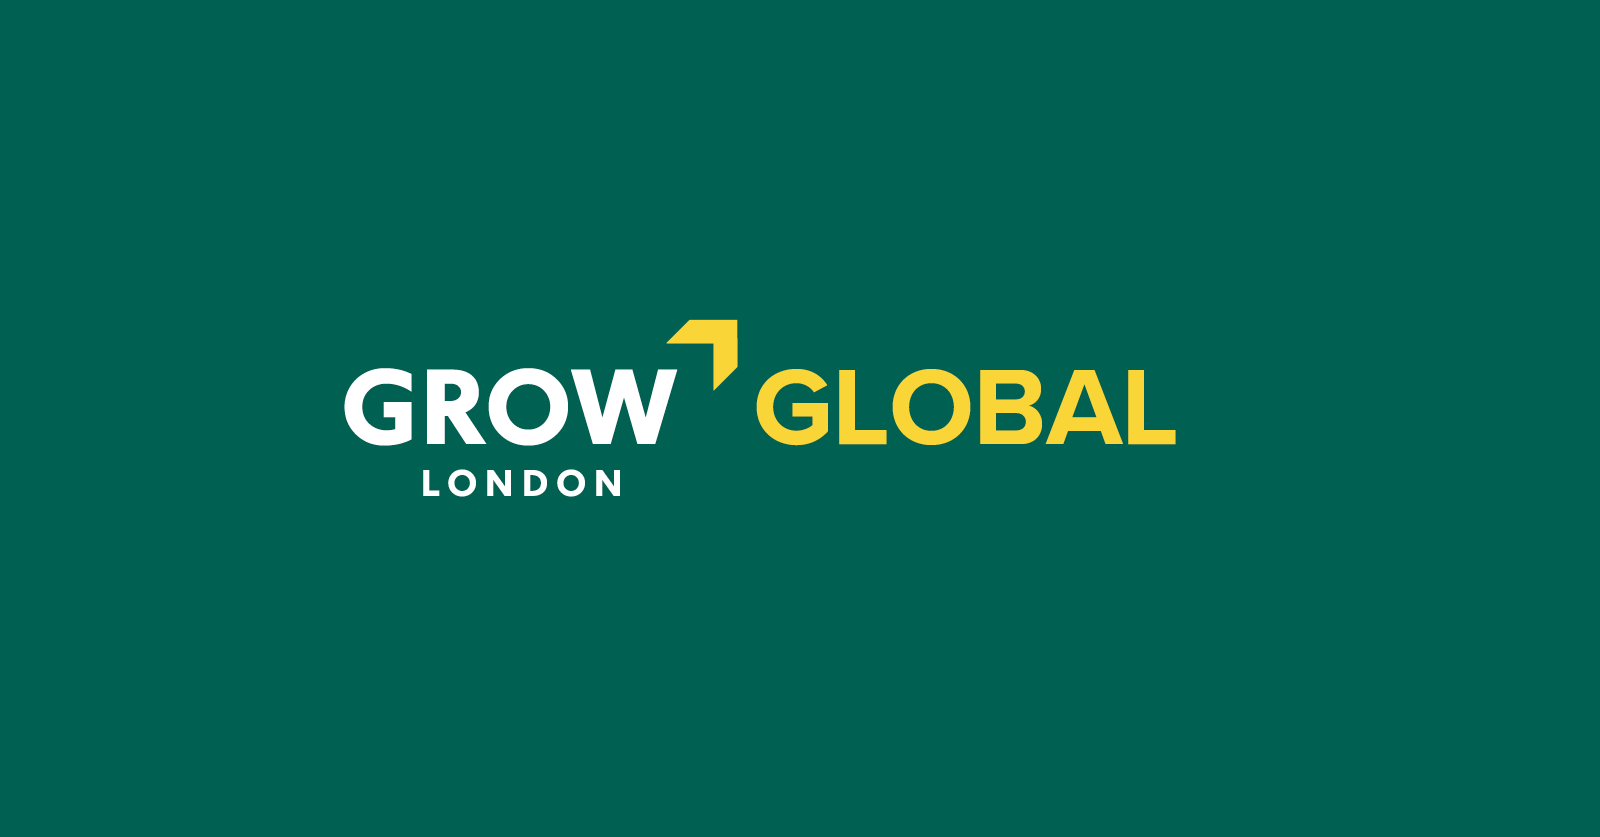 Licel Joins the Grow London Global Programme to Unlock Growth Opportunities